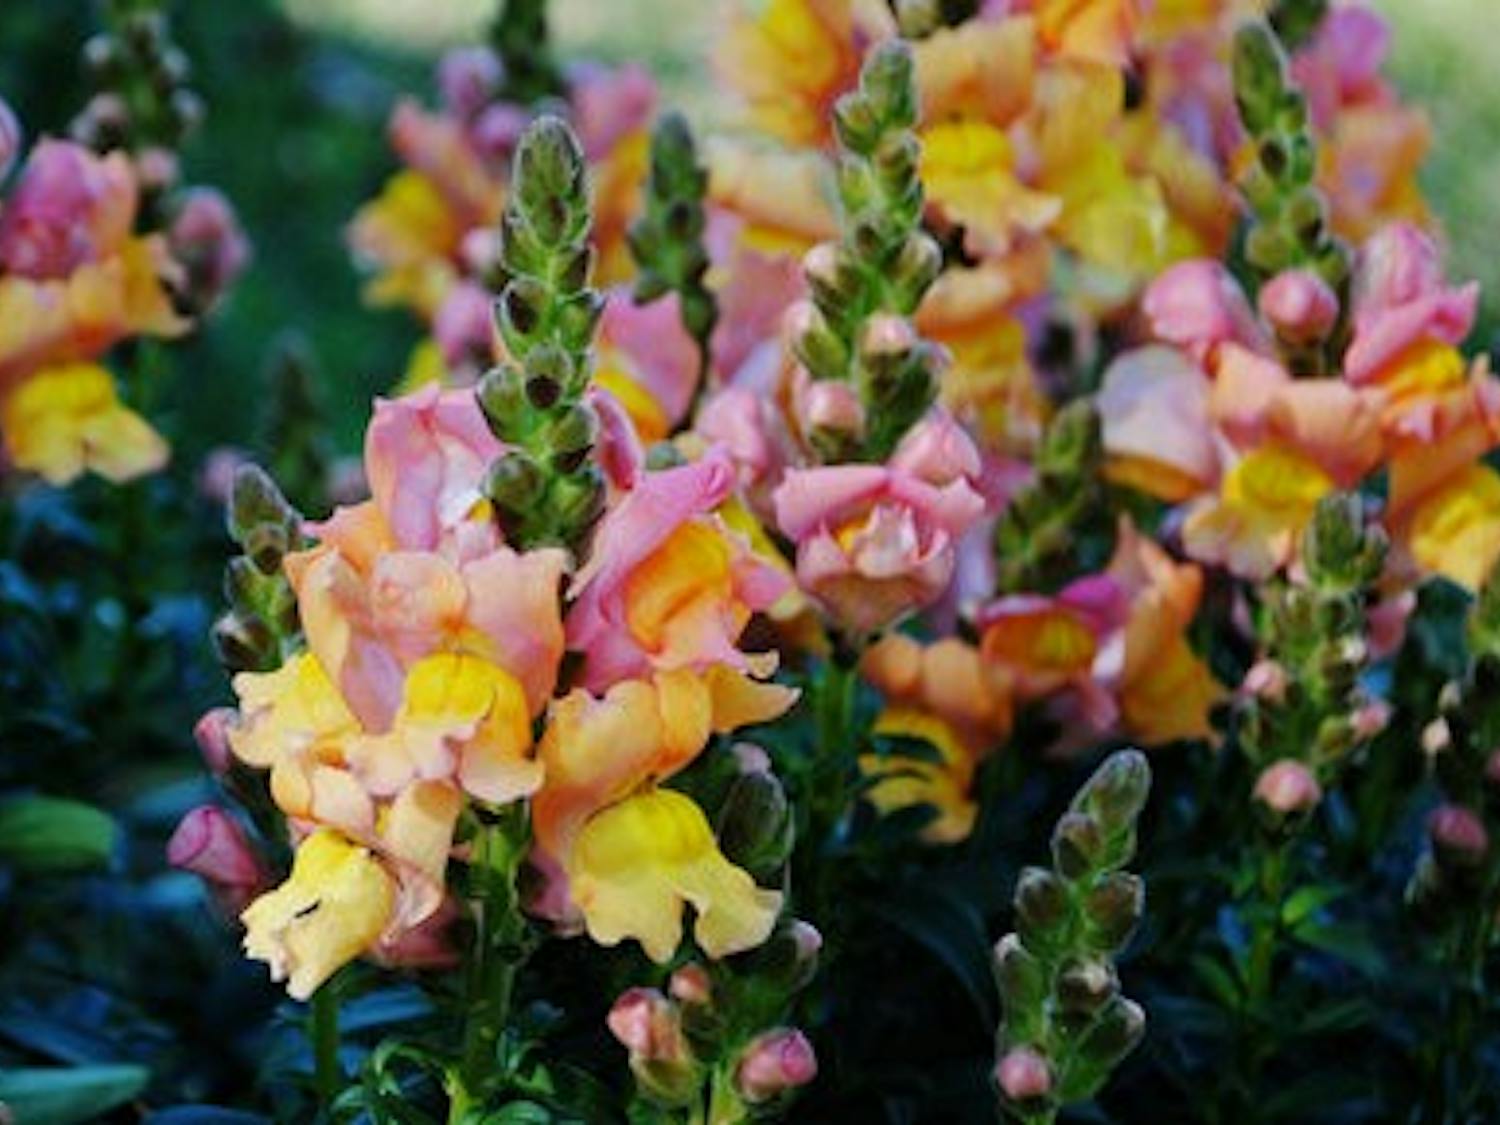 Snapdragons are a reliable flower to plant during the fall and can be purchased at Blooming Colors. (Maria Iampietro / PHOTO EDITOR)